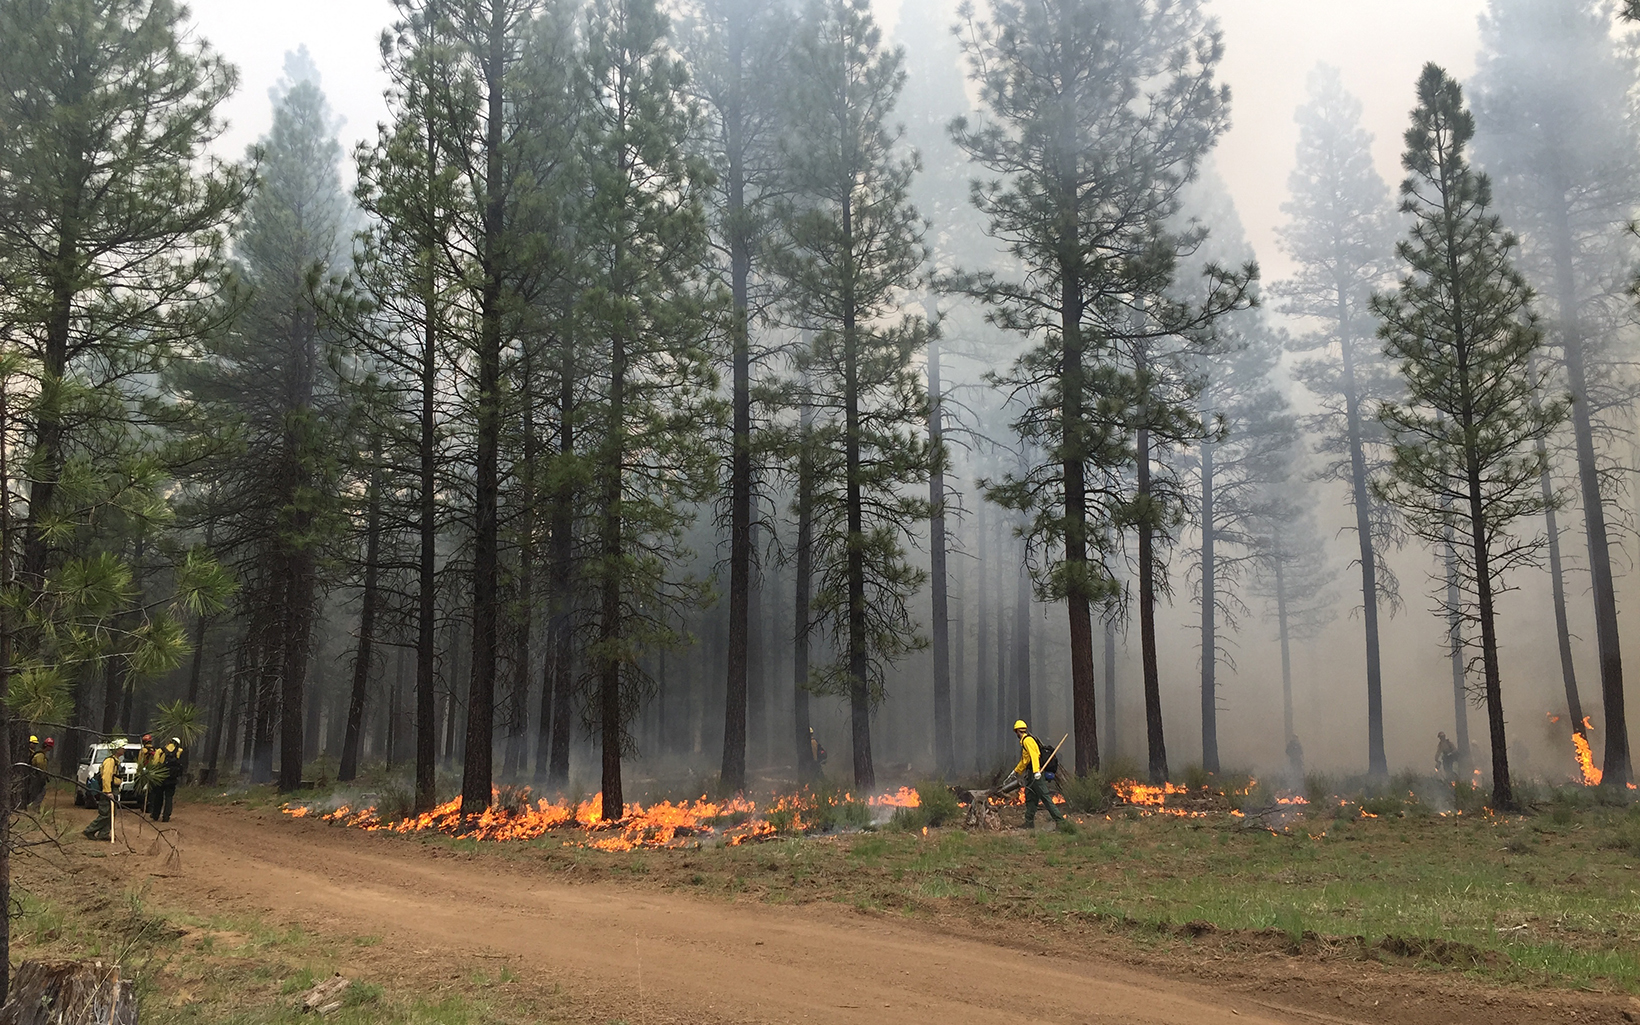 A low intensity fire burns in a forest at the base of tall pine trees. People walk through the forest monitoring the controlled burn.